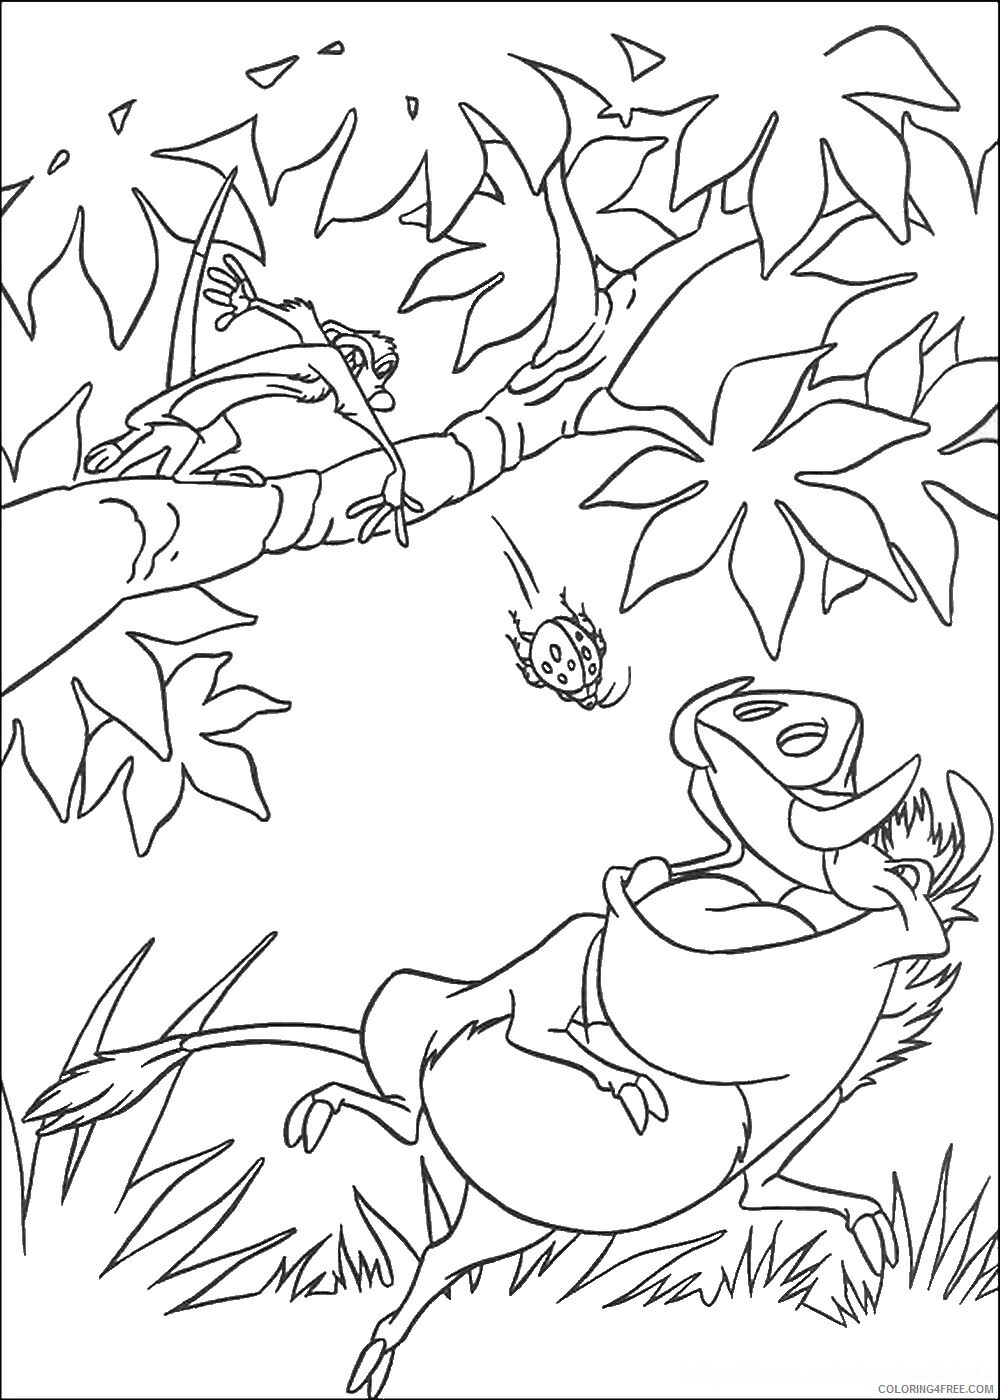 The Lion King Coloring Pages TV Film lionking_22 Printable 2020 09152 Coloring4free